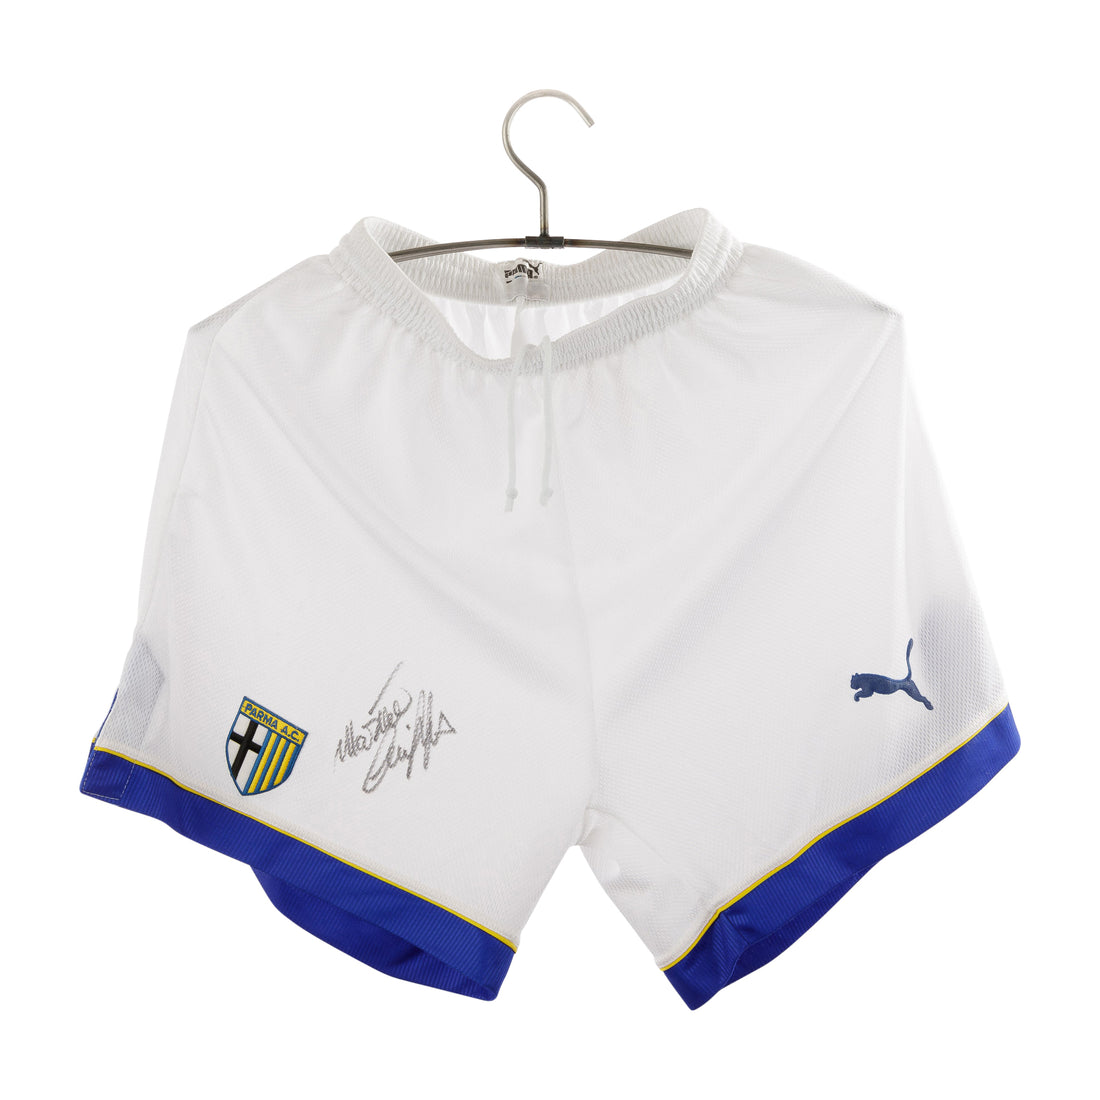 Parma 1997 - 1998 Signed Home Shorts